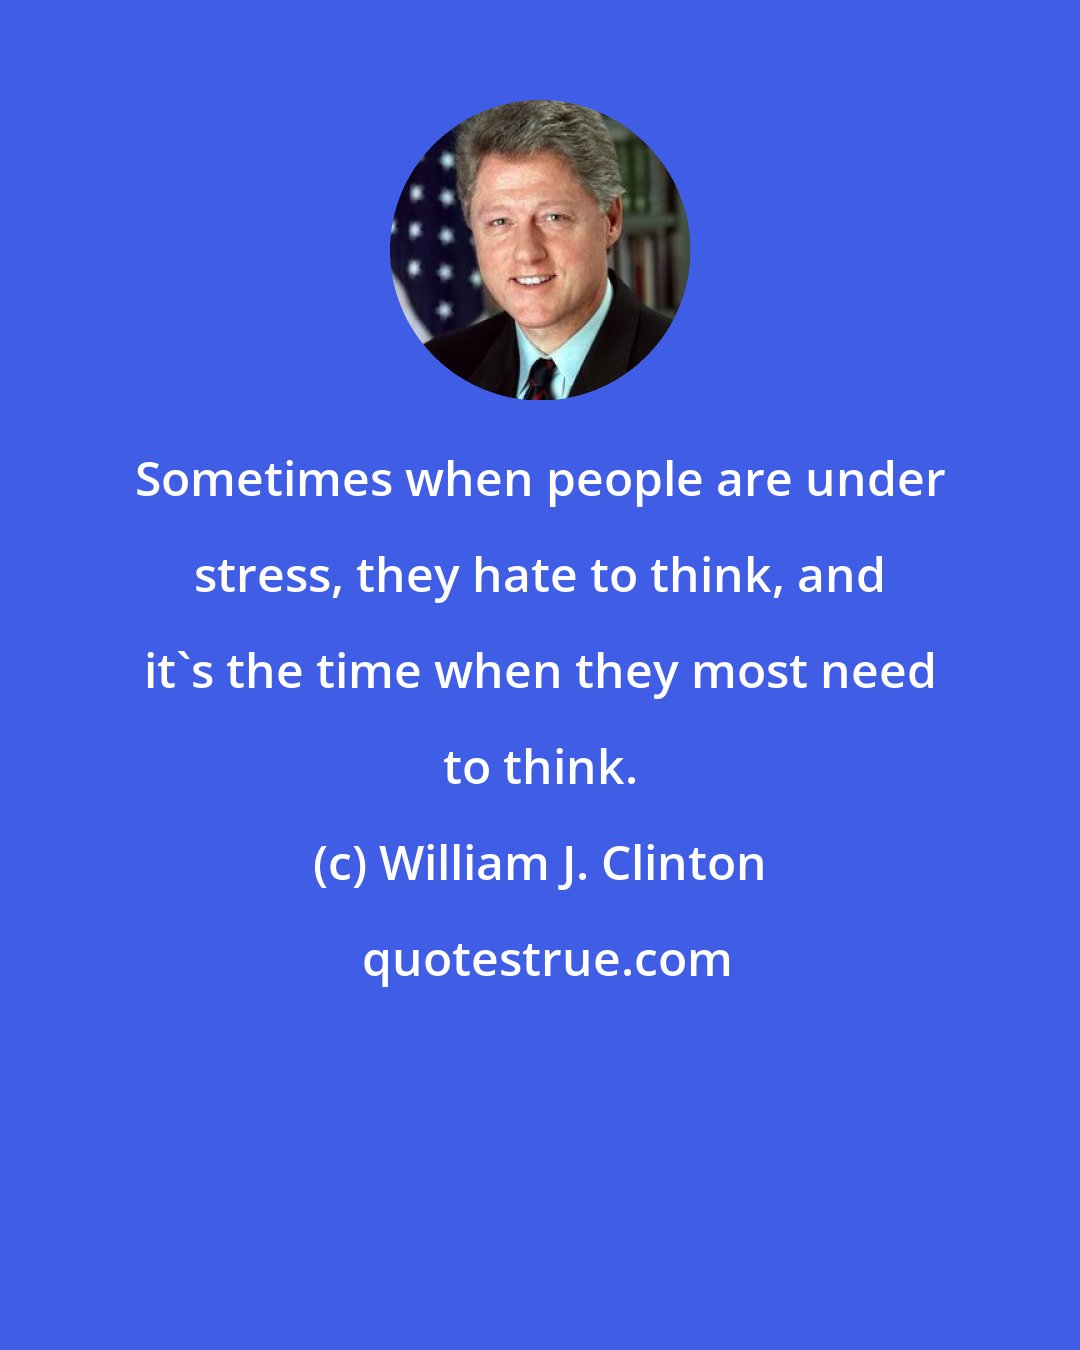 William J. Clinton: Sometimes when people are under stress, they hate to think, and it's the time when they most need to think.